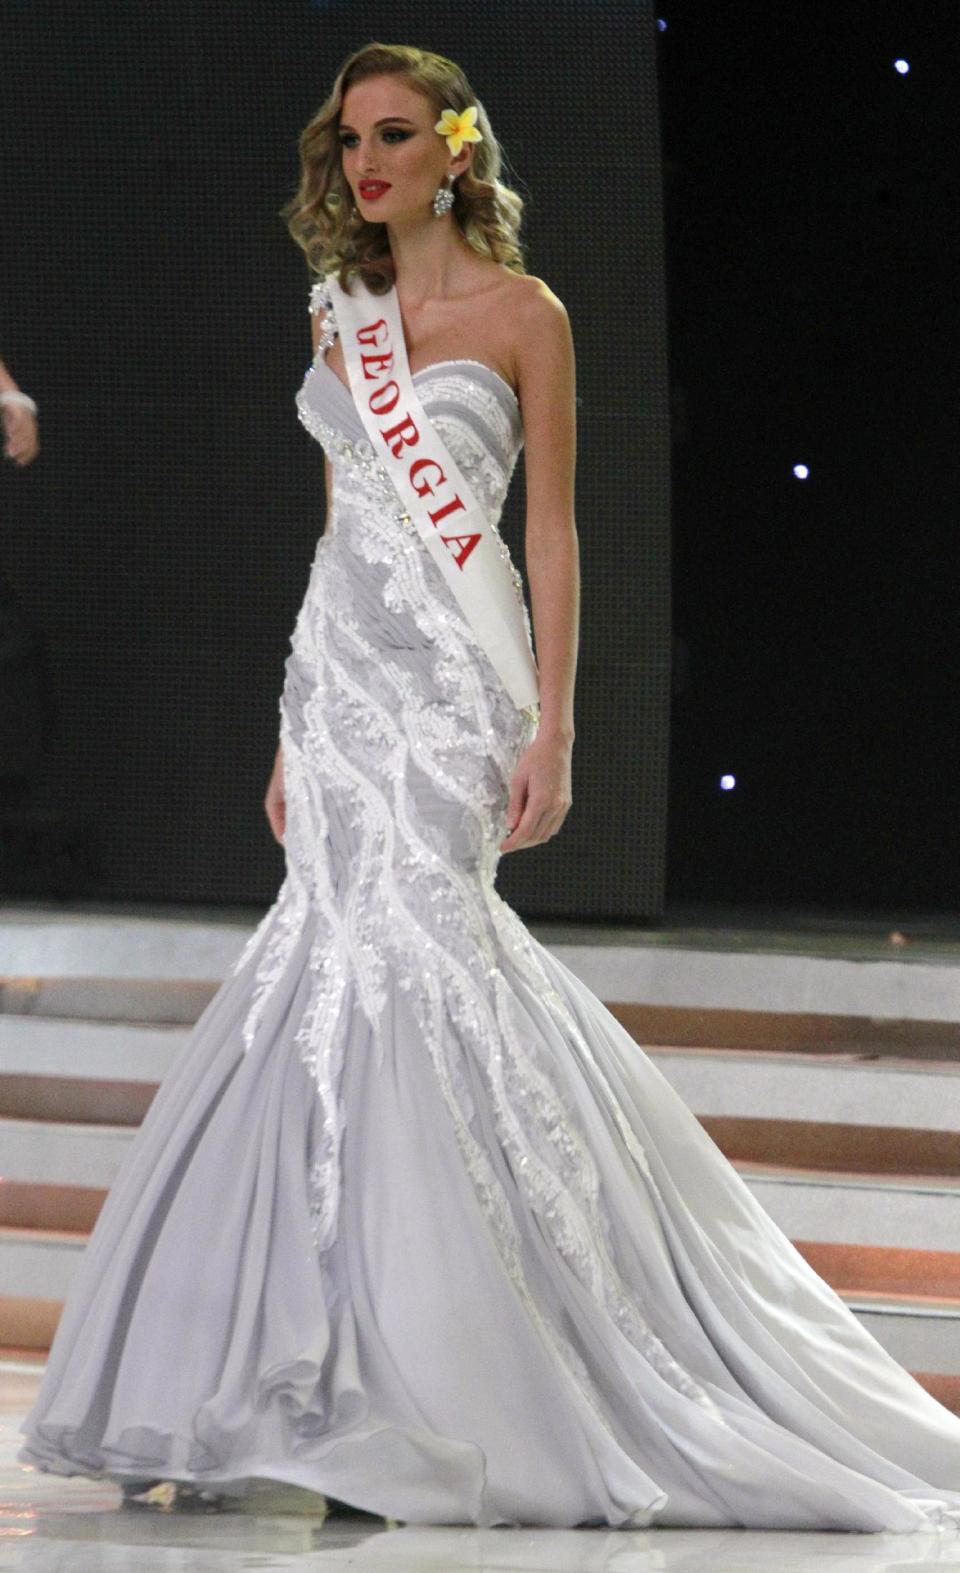 Miss Georgia Tamar Shedaniai walks on stage during opening of the 63rd Miss World Pageant ceremony in Nusa Dua, Bali, Indonesia on Sunday, Sept. 8, 2013. (AP Photo/Firdia Lisnawati)